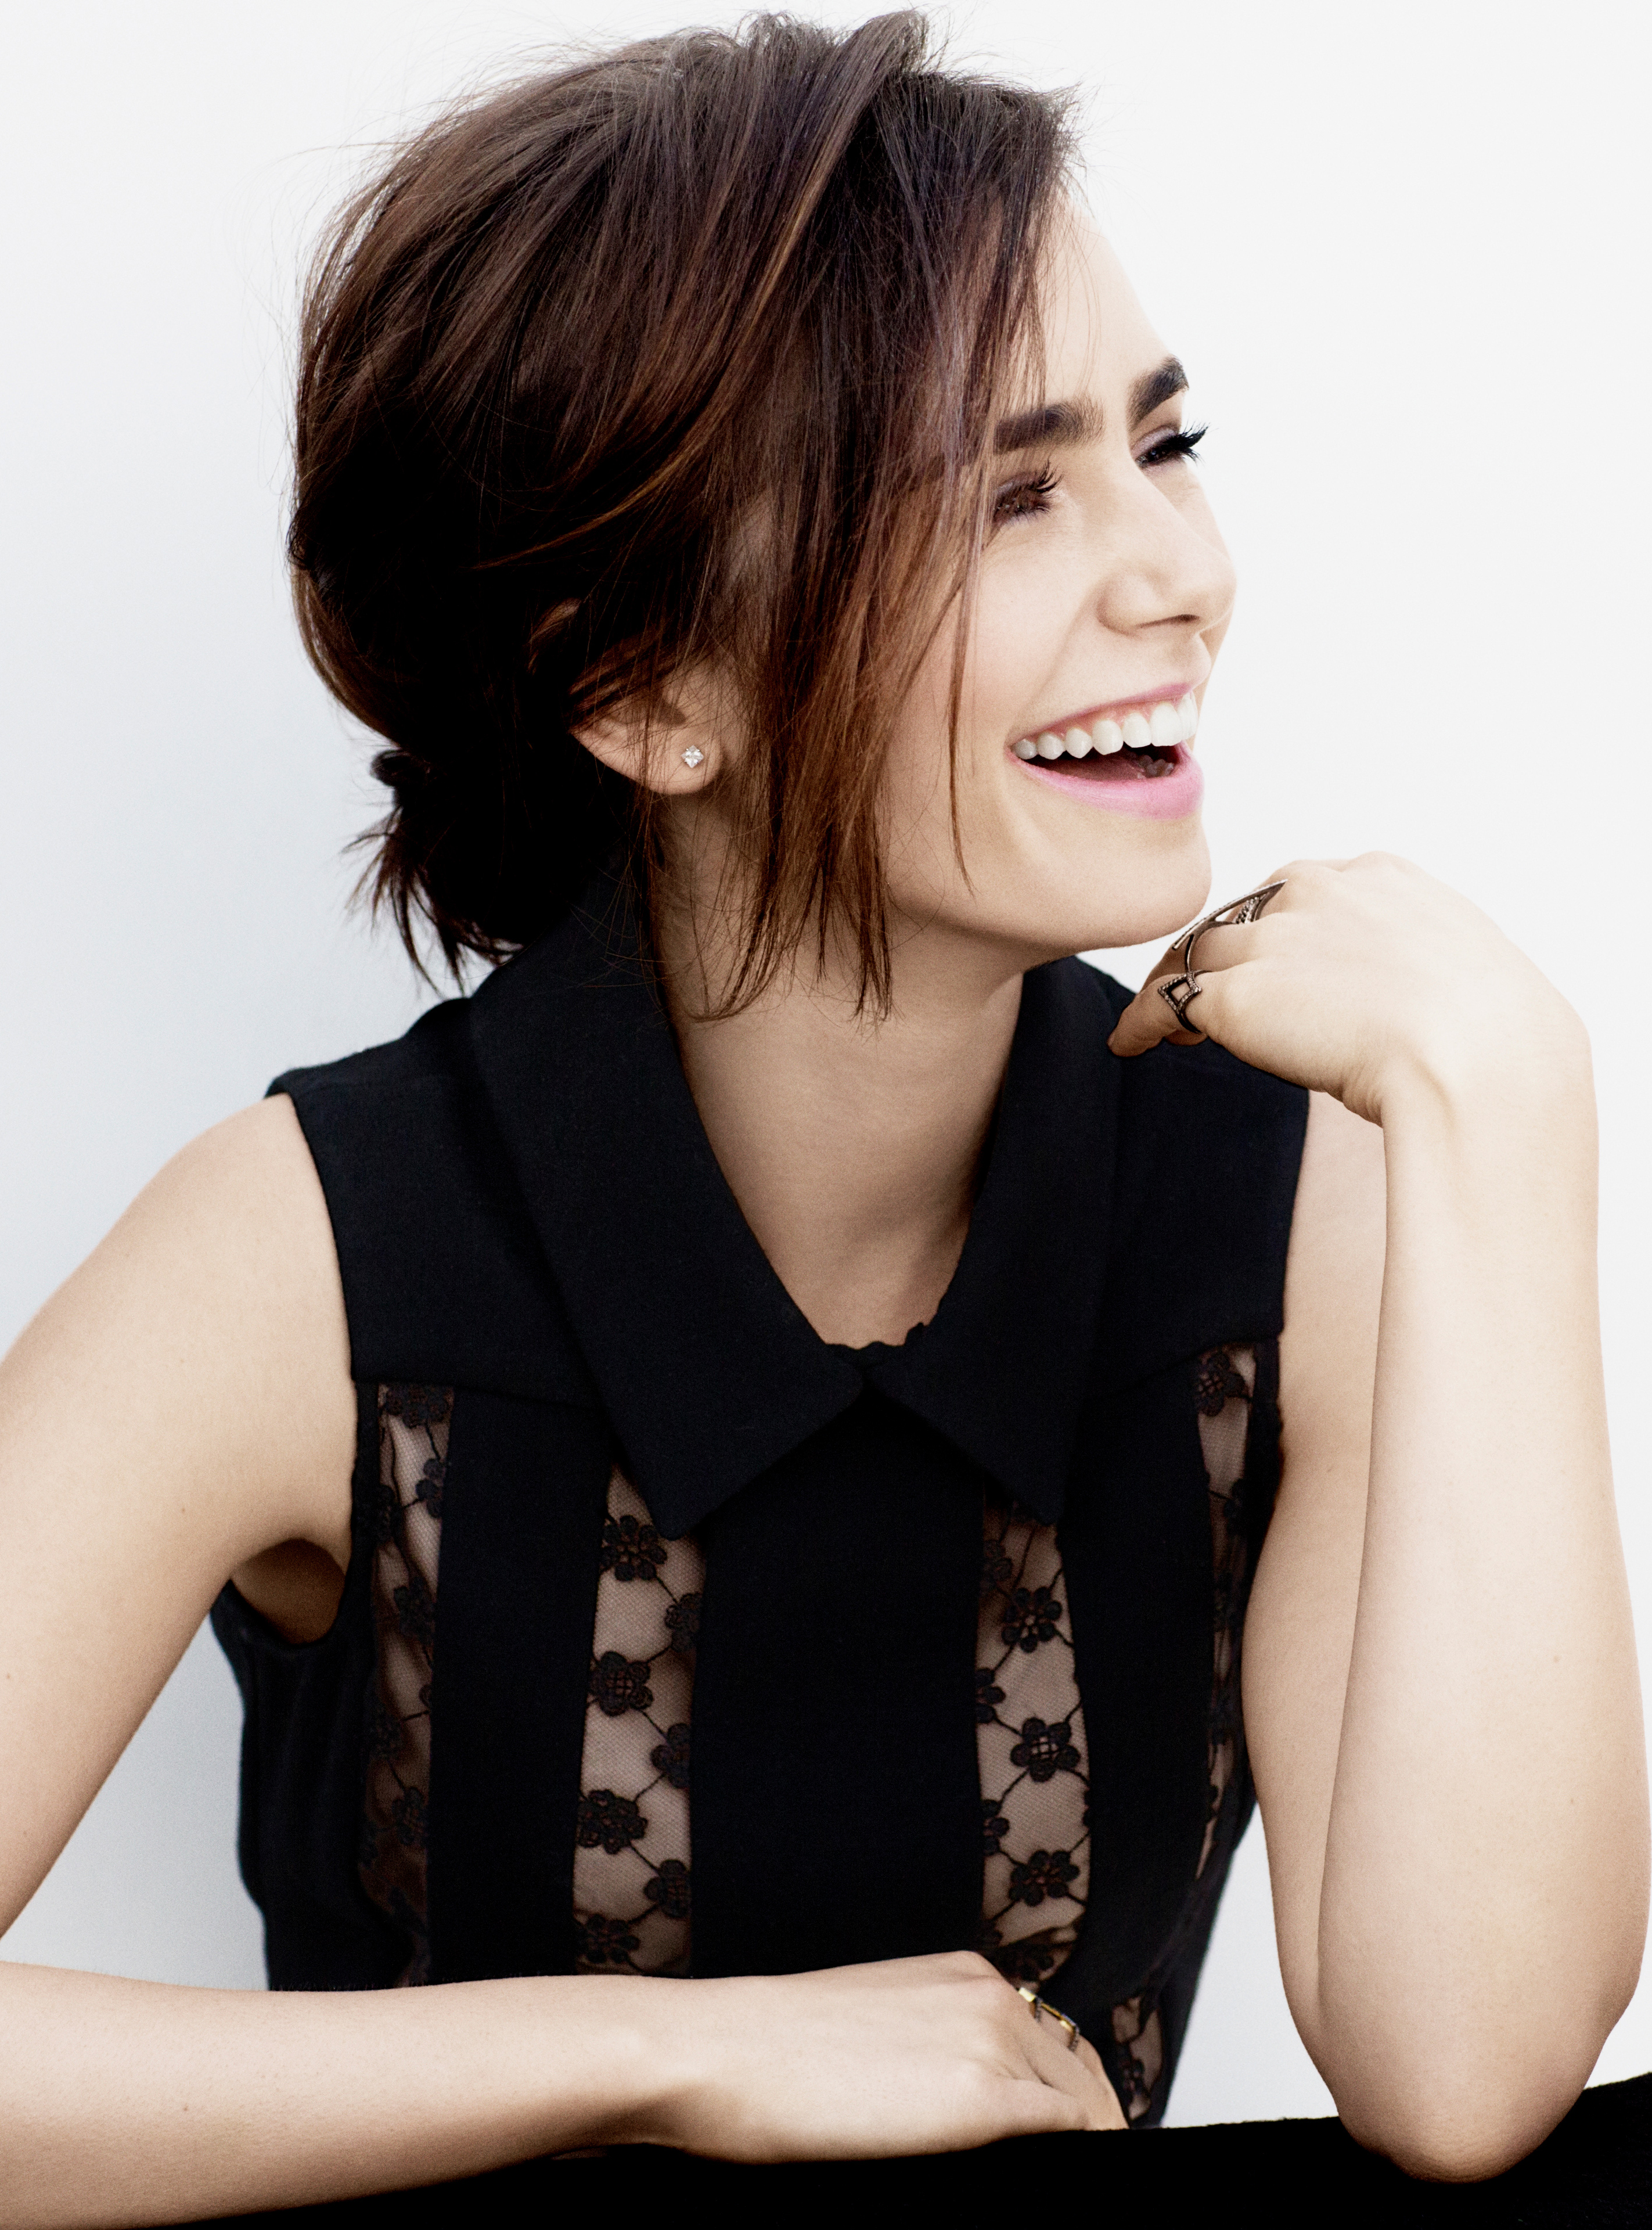 People 2845x3840 Lily Collins actress women brunette laughing see-through blouse portrait display simple background